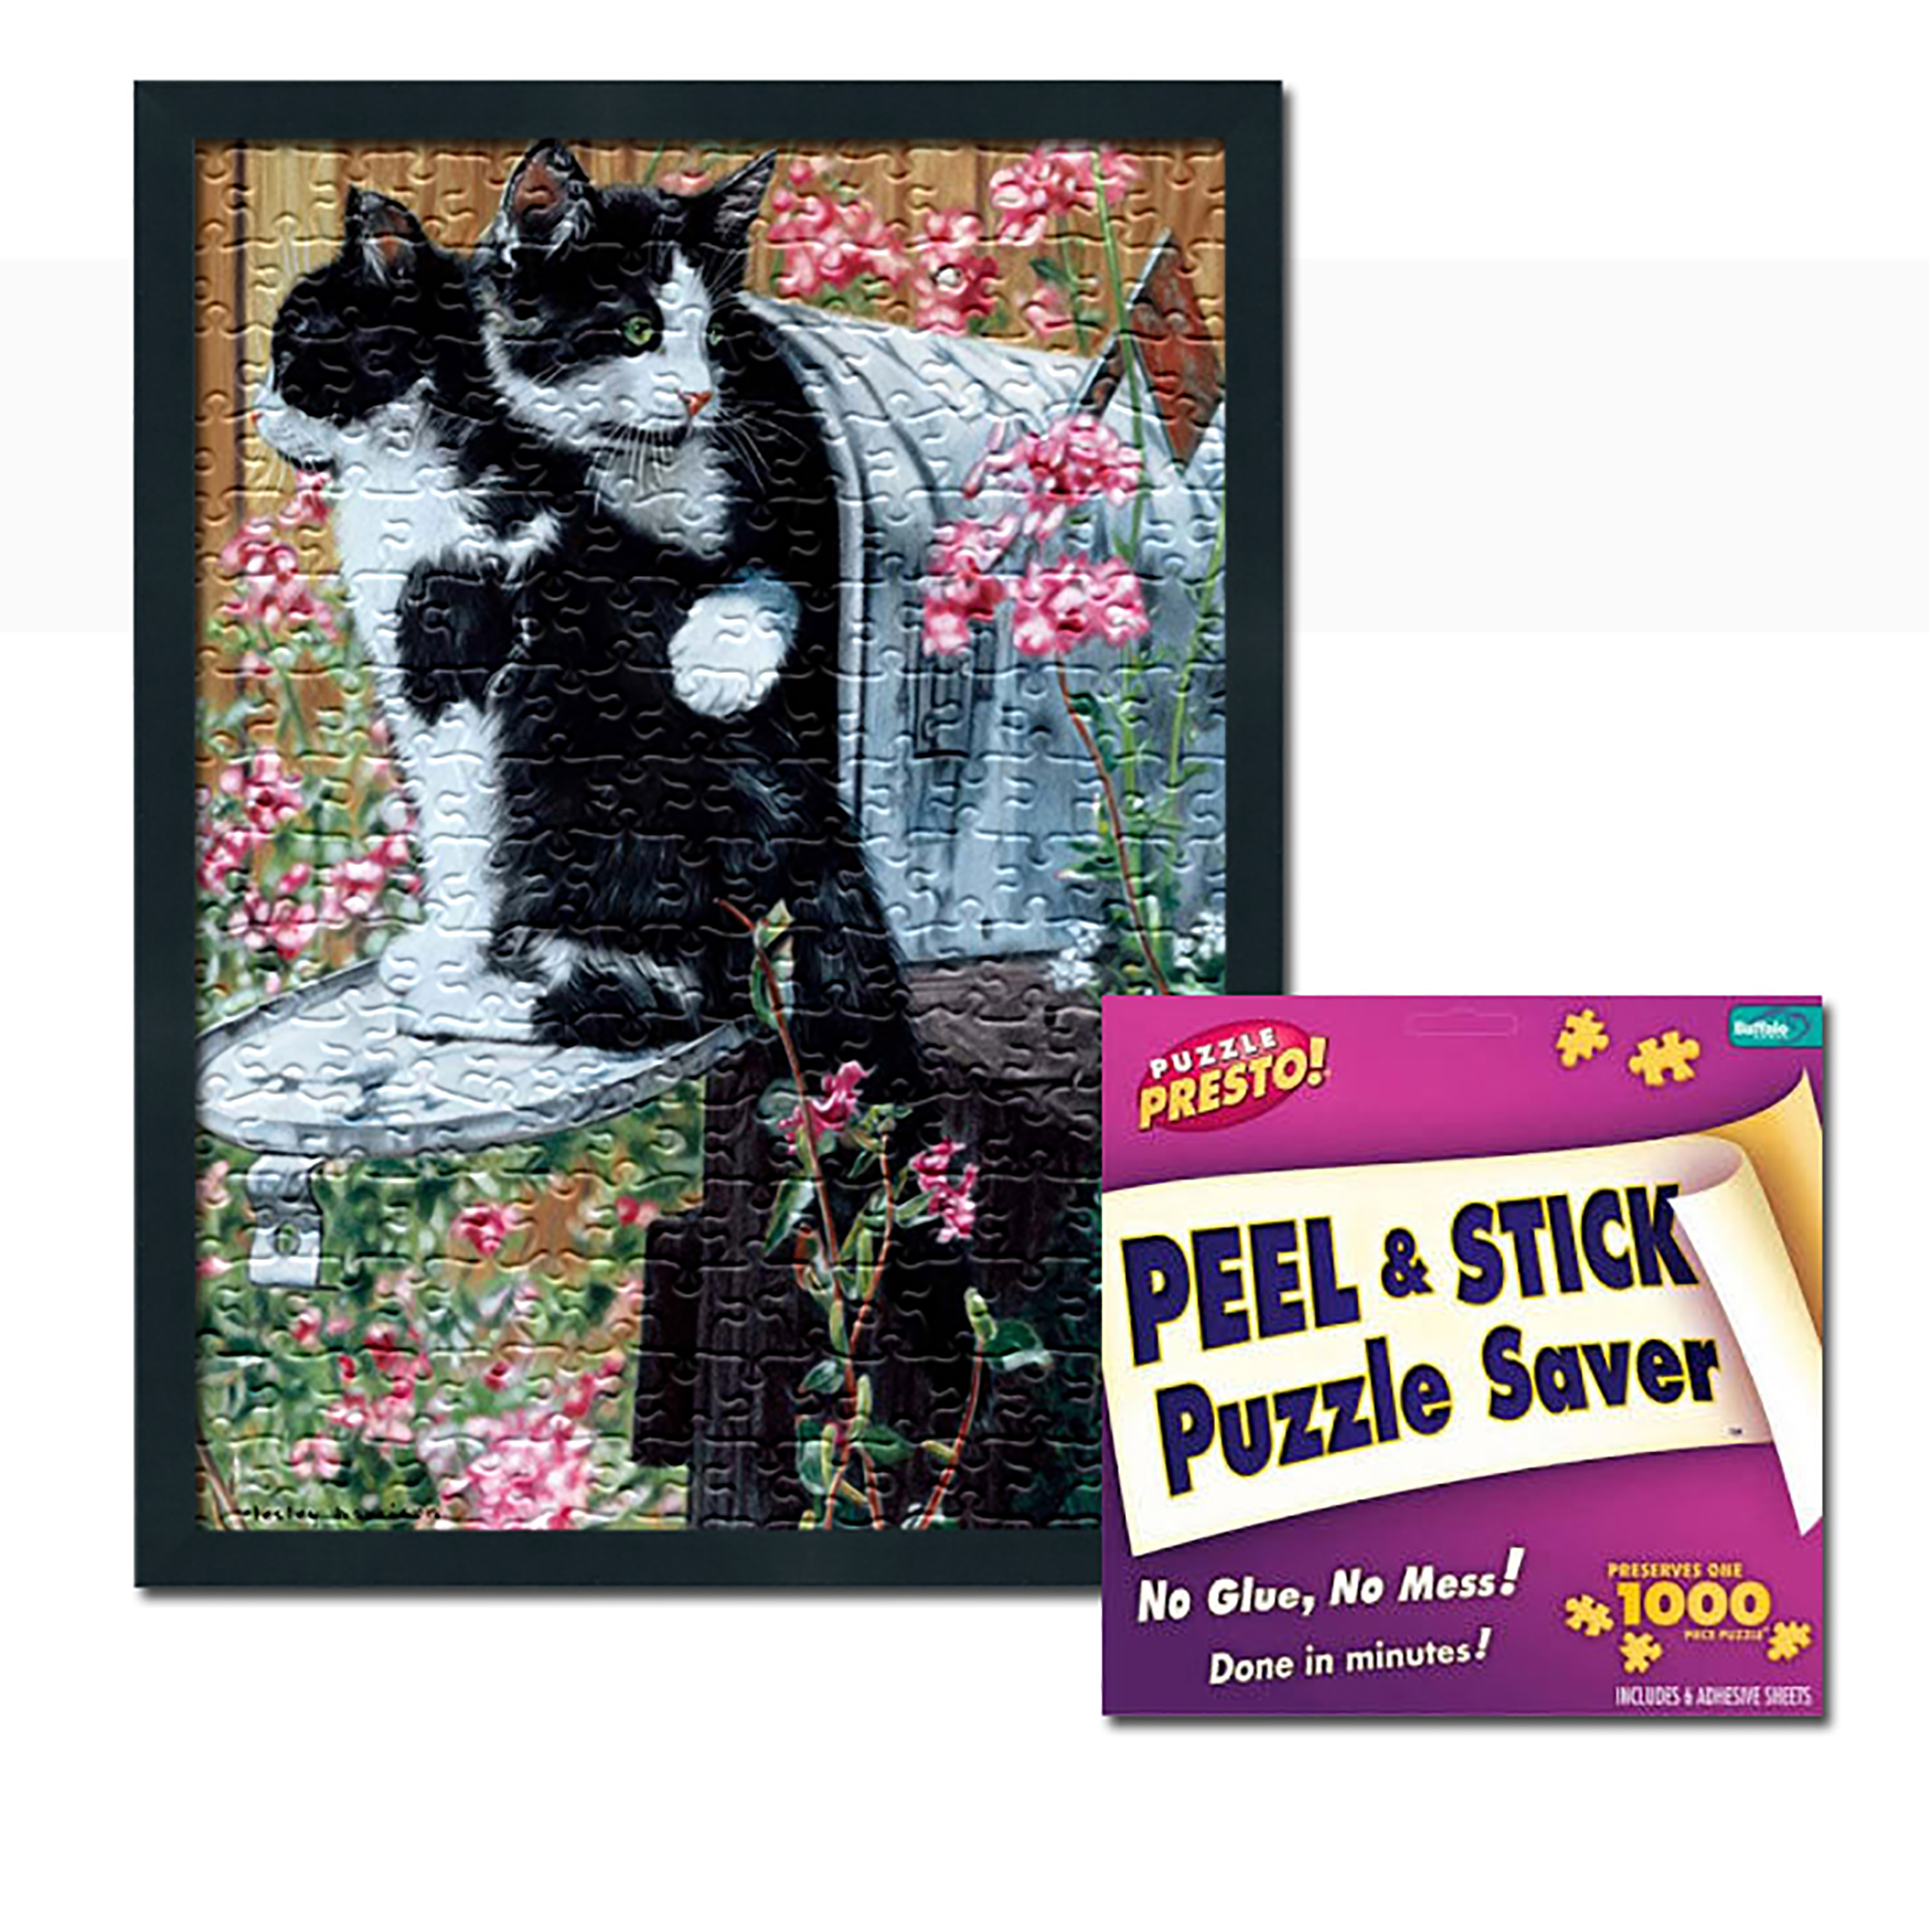 Jigsaw Puzzle Frame Kit - Made To Display Puzzles Measuring 21.25x15 inches - image 1 of 7